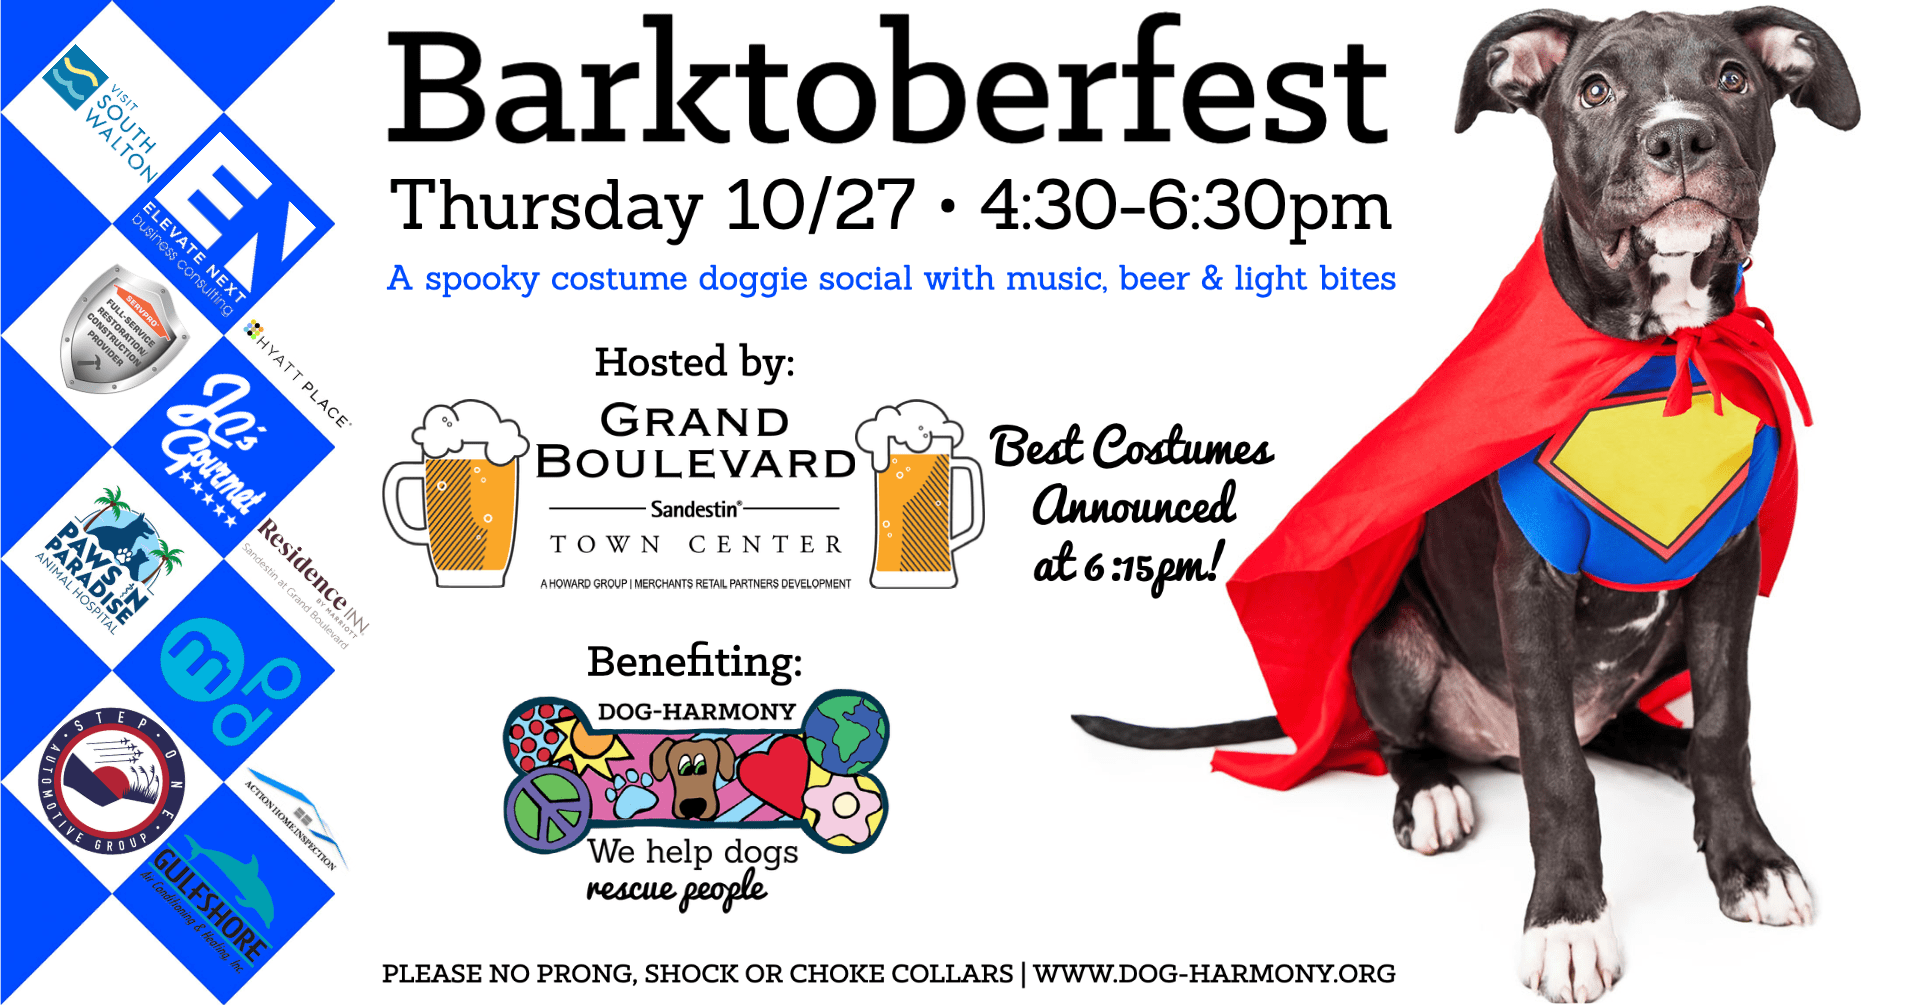 graphic of dog in superman costume with event details: barktoberfest on october 27 from 4:30-6:30pm at grand boulevard